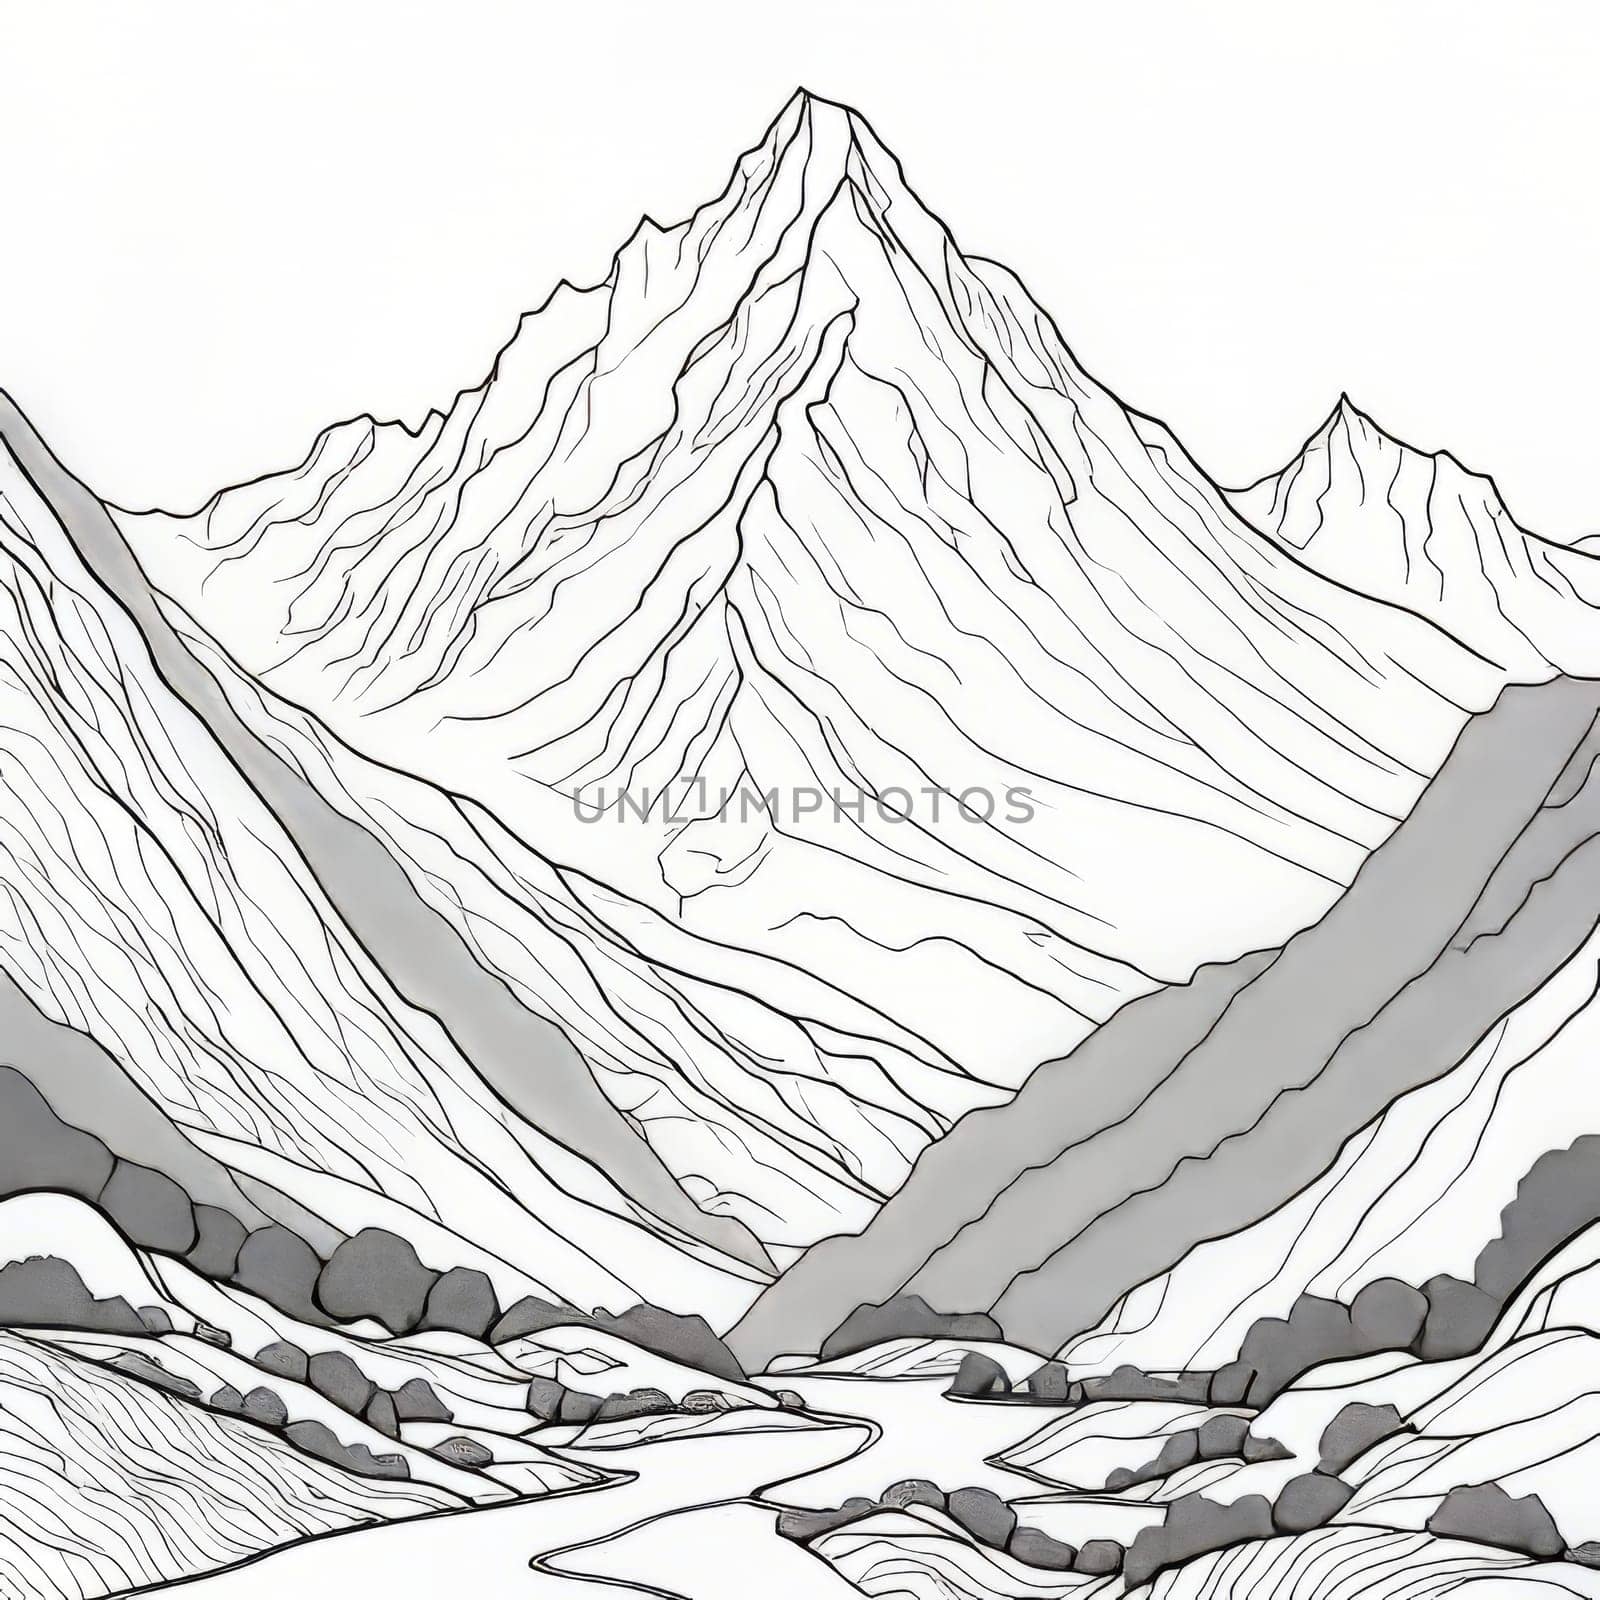 Serene black, white painting capturing majestic Nepal mountains, lush trees in harmonious contrast. Printed on merchandise like tshirts, mug, notebooks for nature lovers, travel brochure, print, logo by Angelsmoon